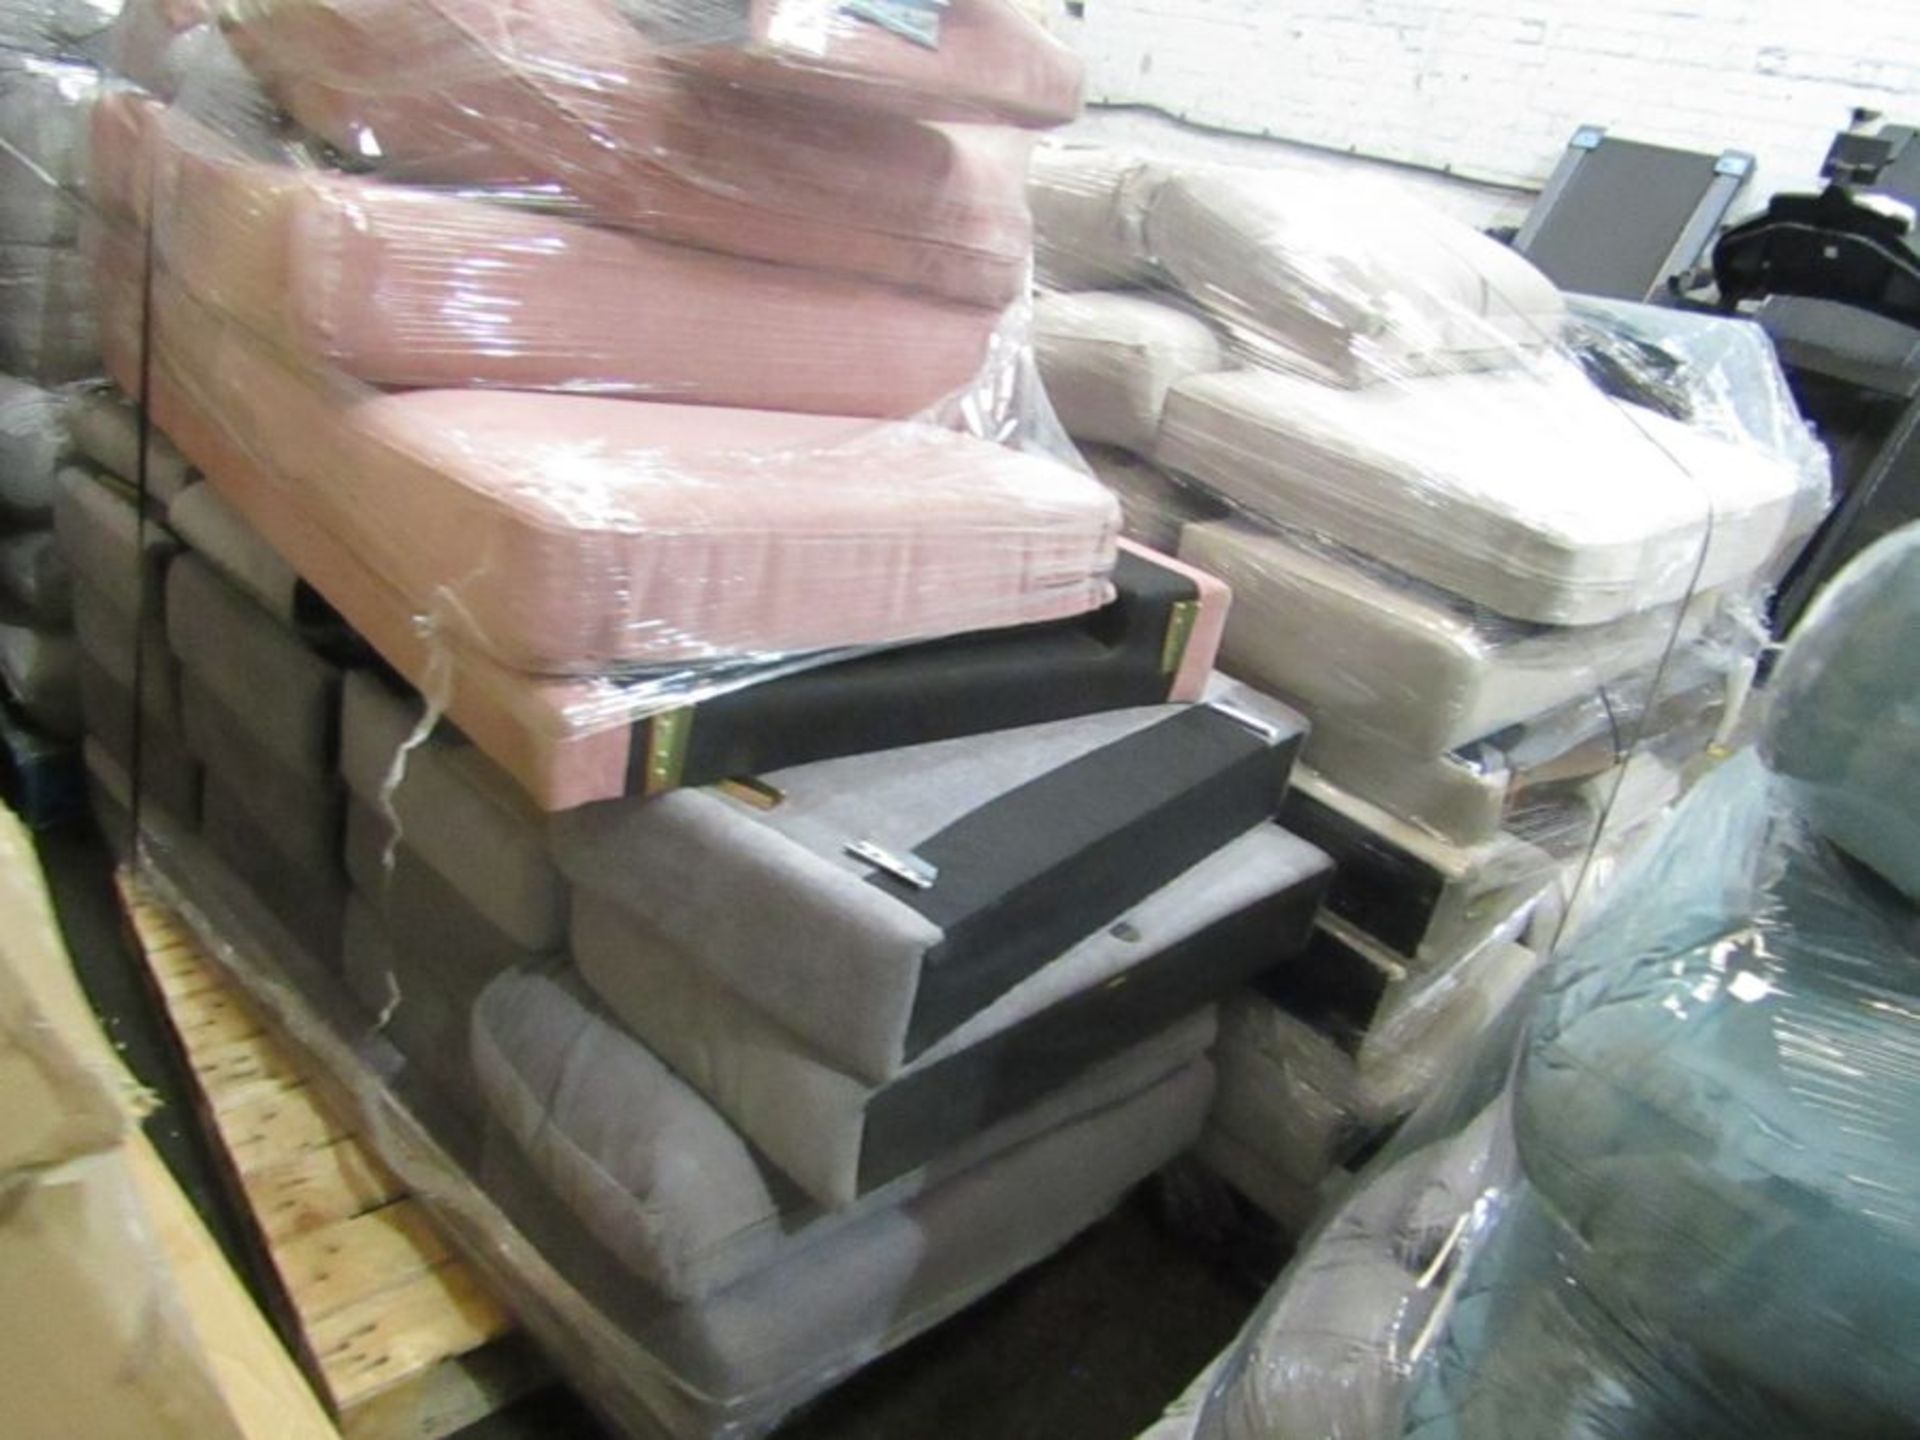 0% Buyers Premium, 24 Pallets of Genuine SNUG SOFA parts - Mixed Lots of Bases Backs Arms Cushions - Image 16 of 16